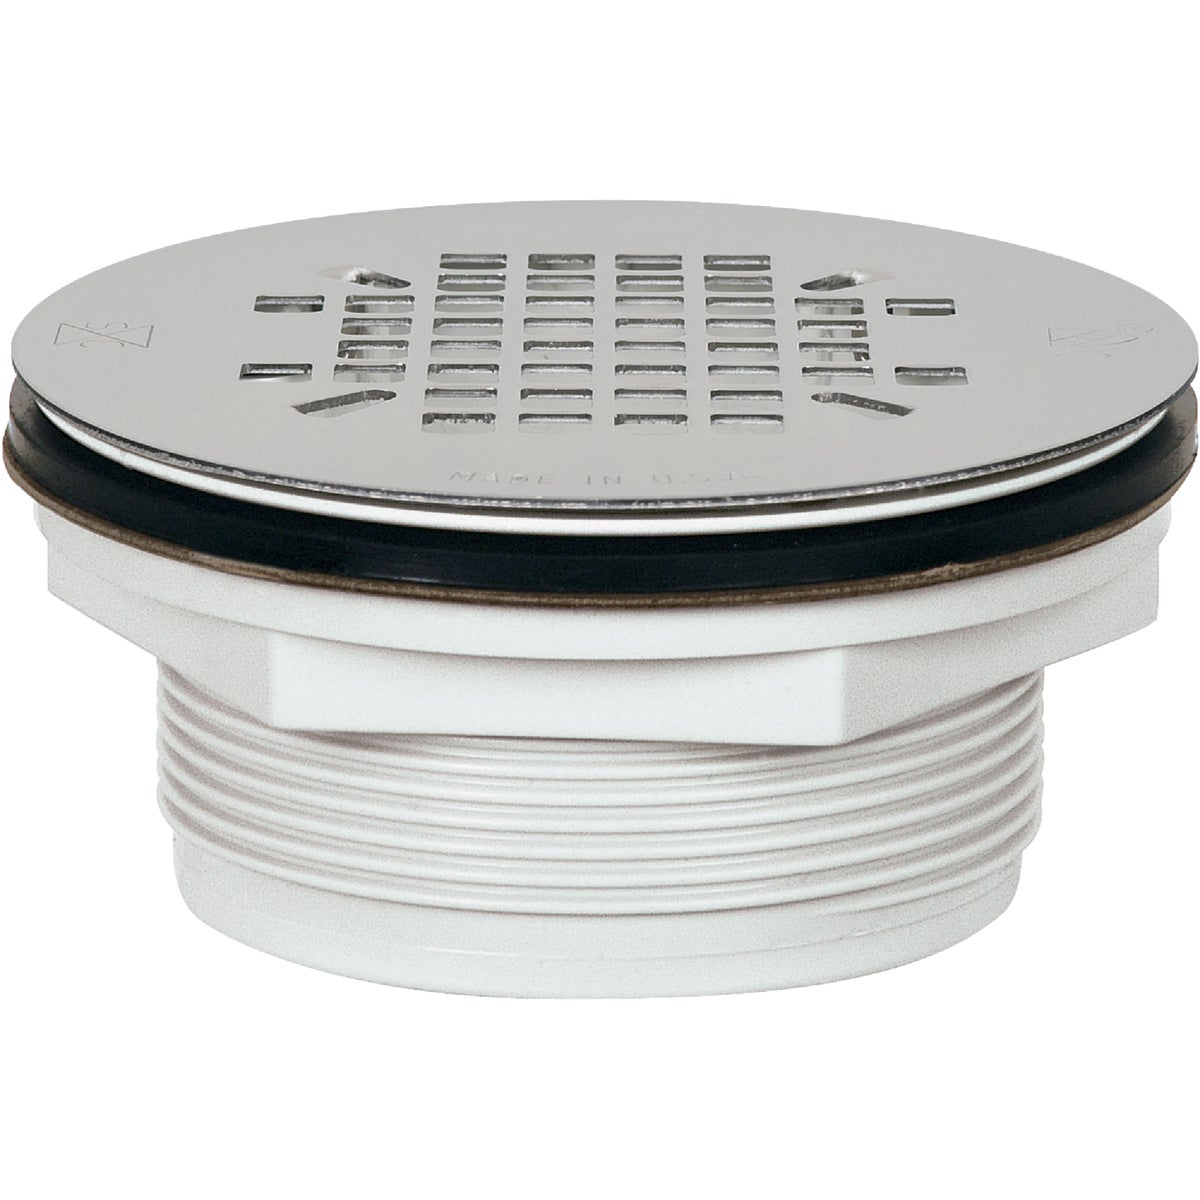 Sioux Chief 2 In. PVC No-Caulk Shower Drain with 4-1/4 In. Stainless Steel Drain